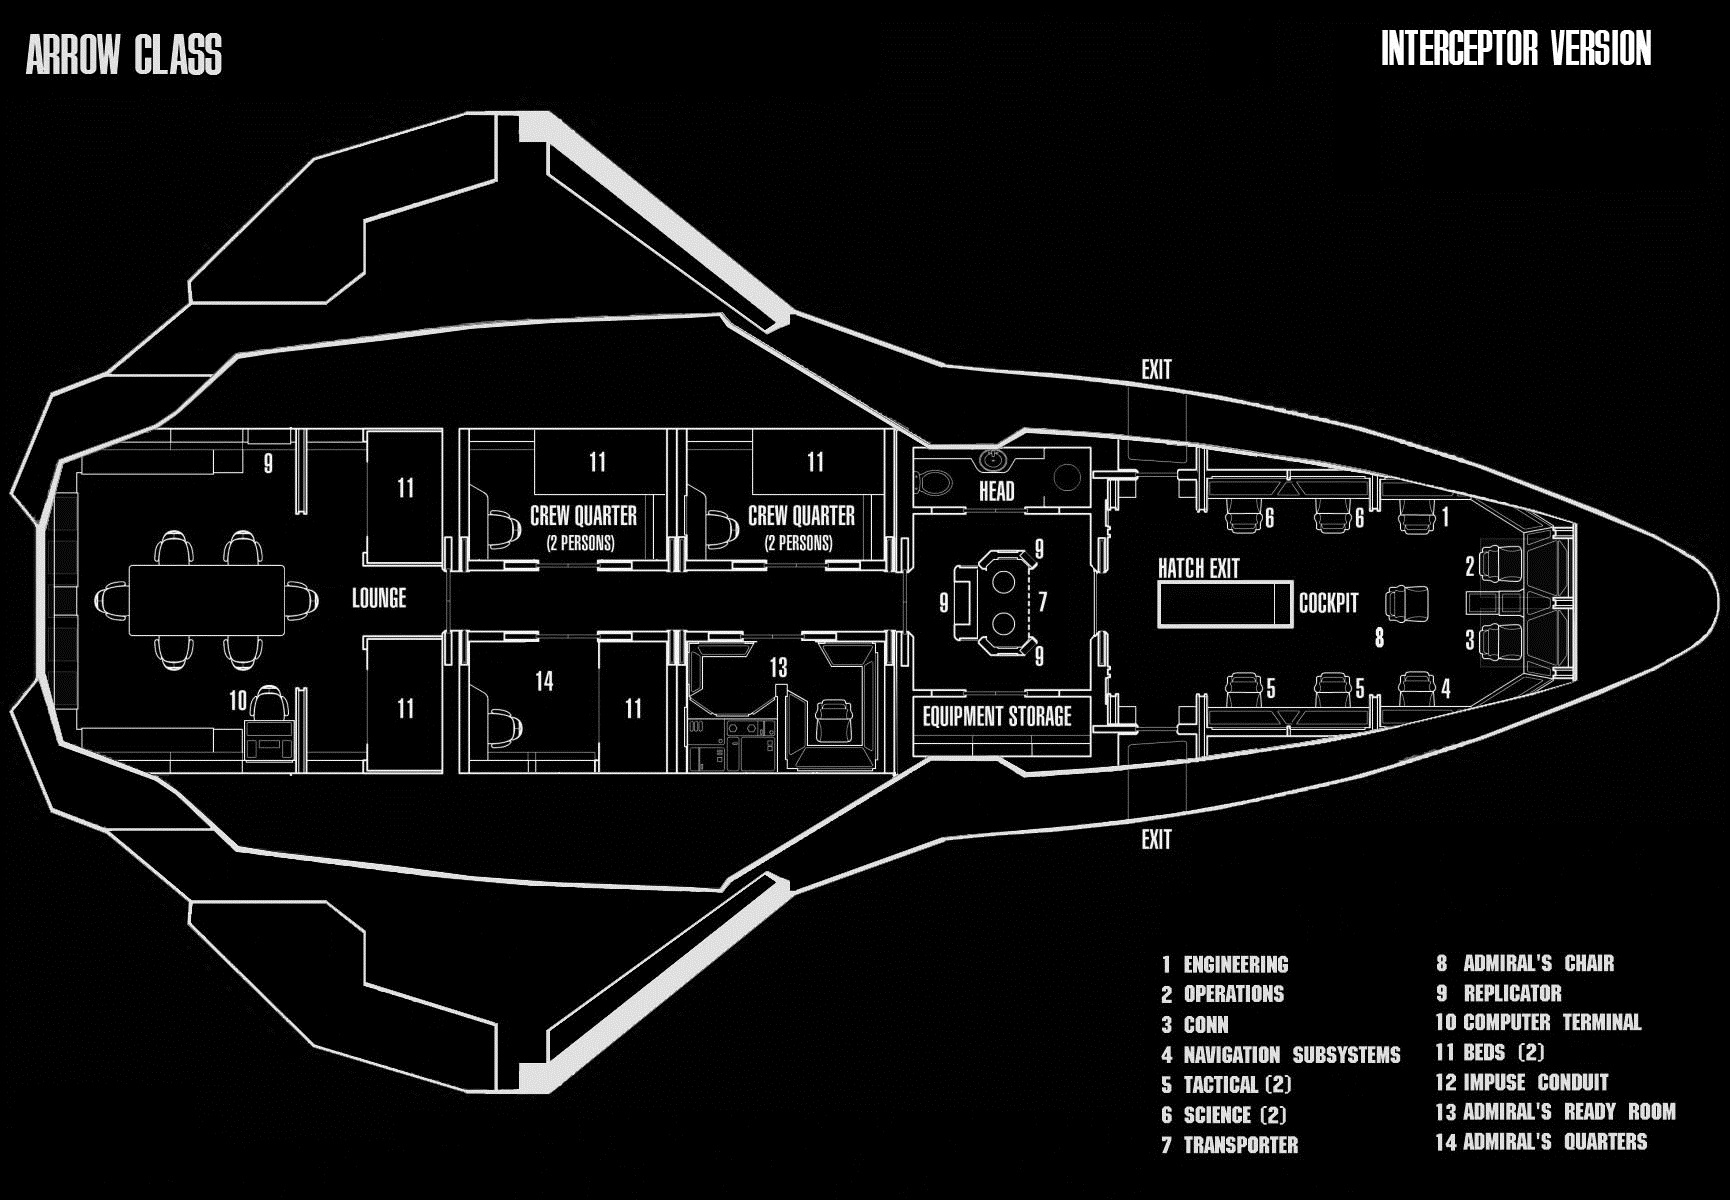 Unaltered Schematics of the Interceptor Arrow Class Runabout which was used as the general template for the Argonaut.